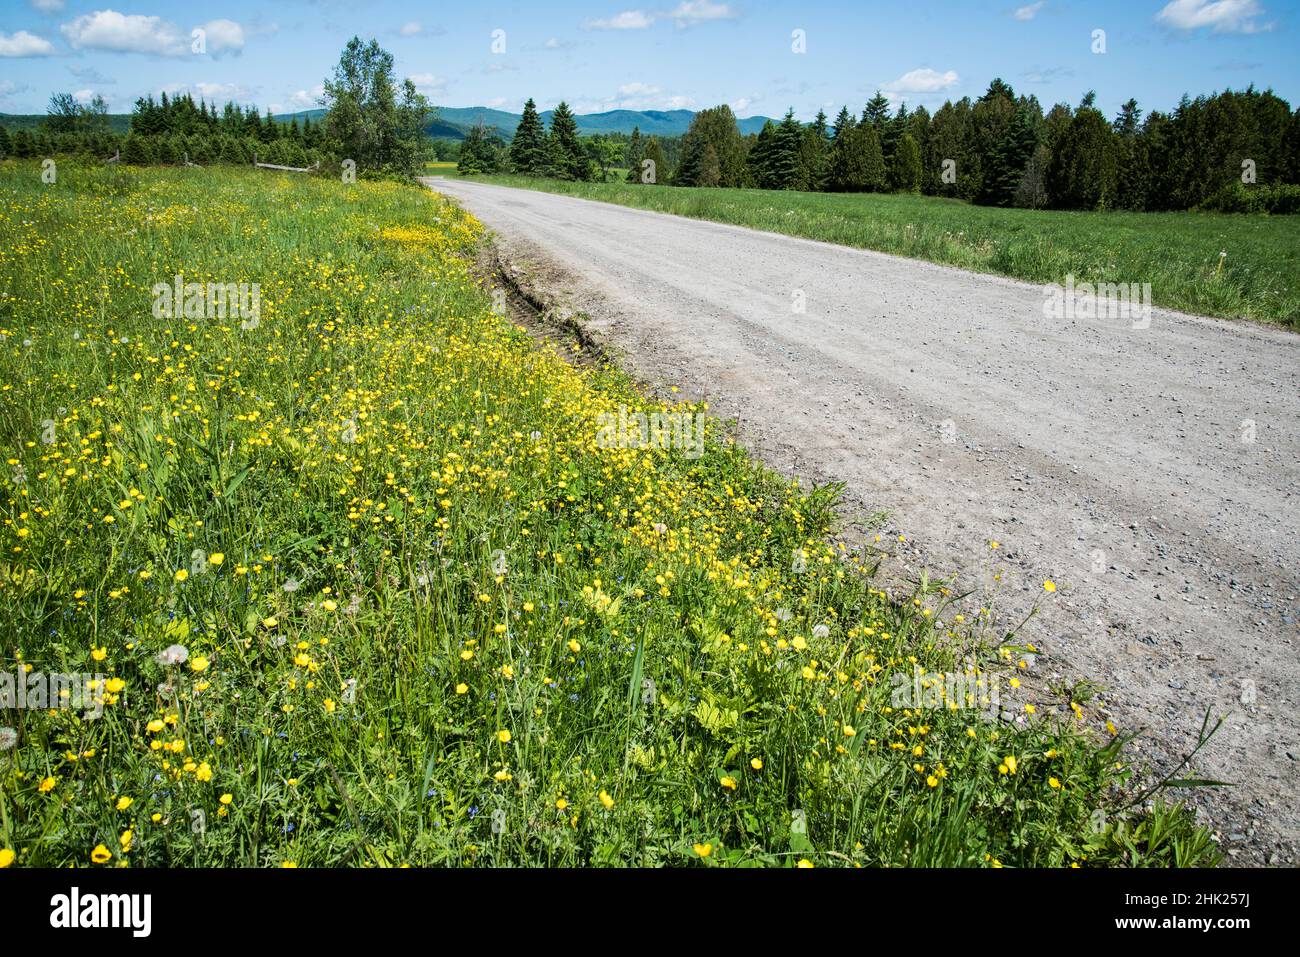 Summertime on a country road in Craftsbury, Vermont, rural New England, USA. Stock Photo